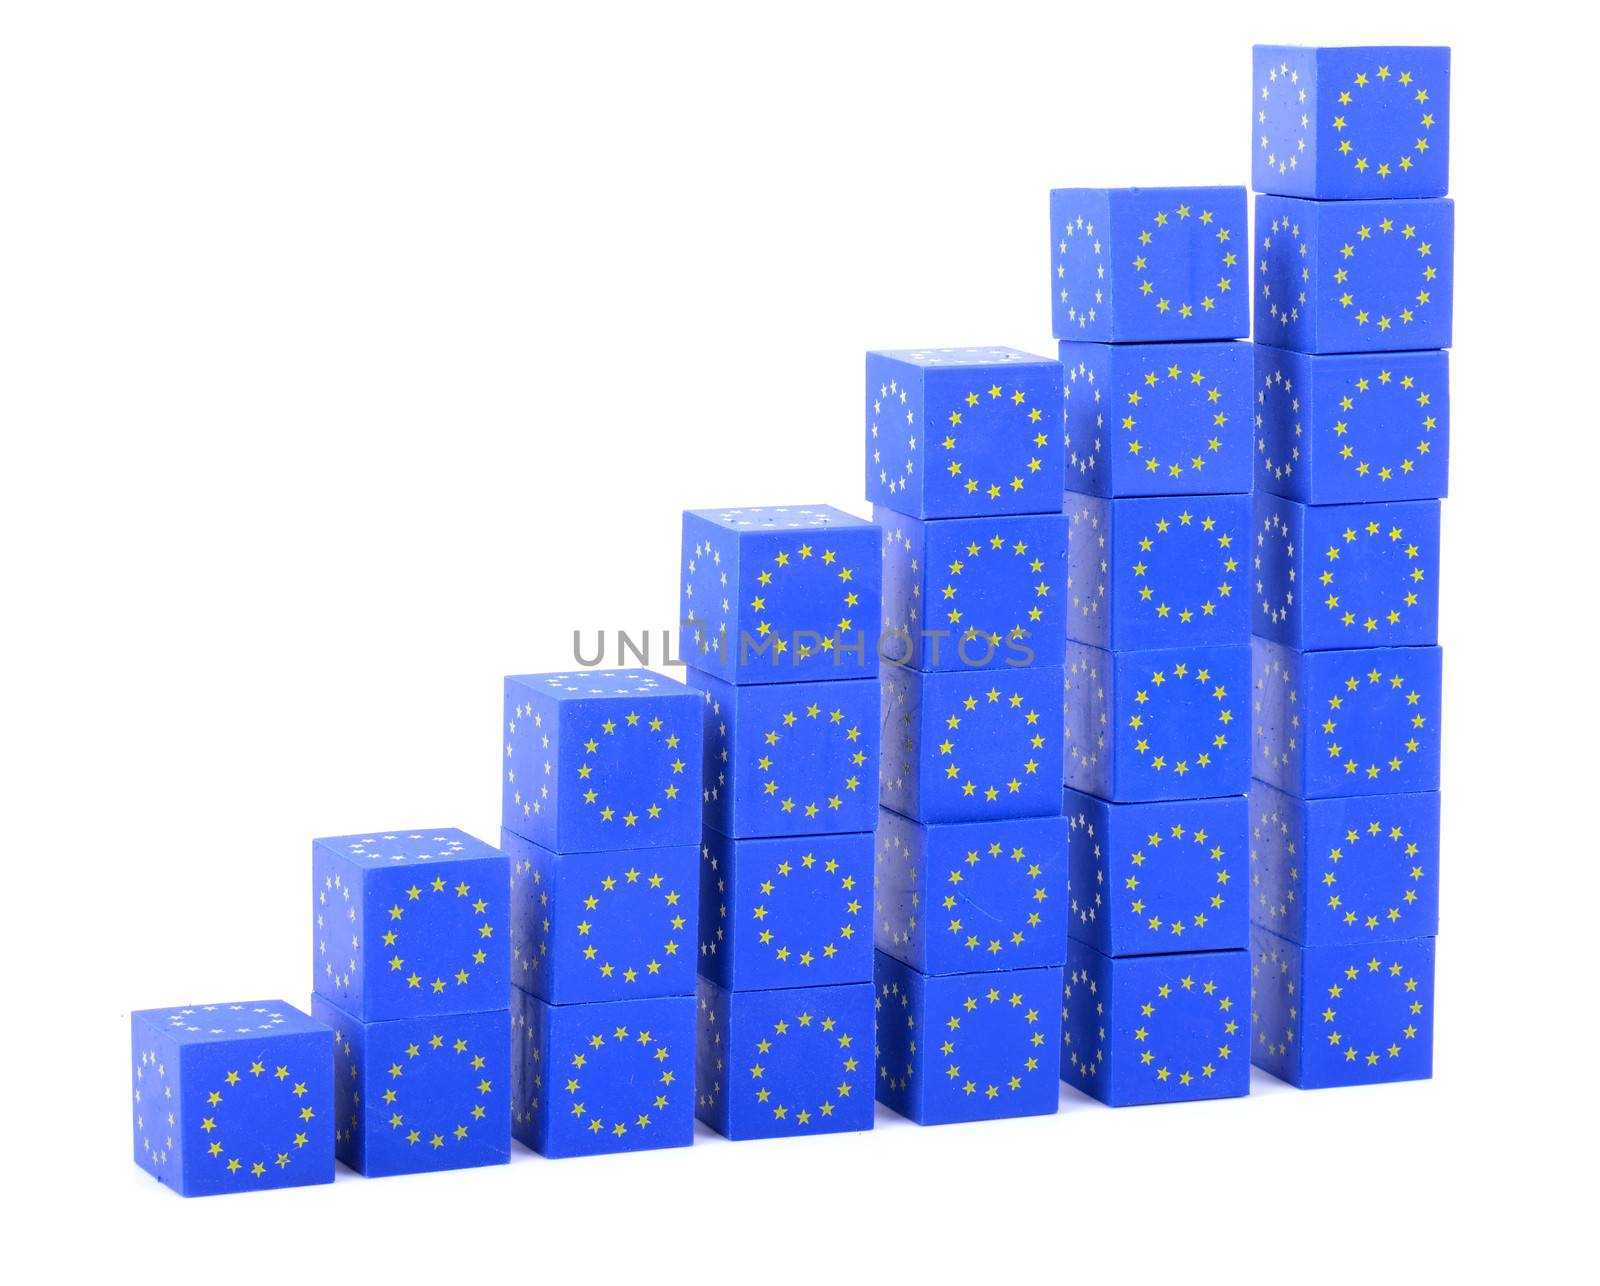 euro graph made from blue blocks with euro symbols on, concept of growth